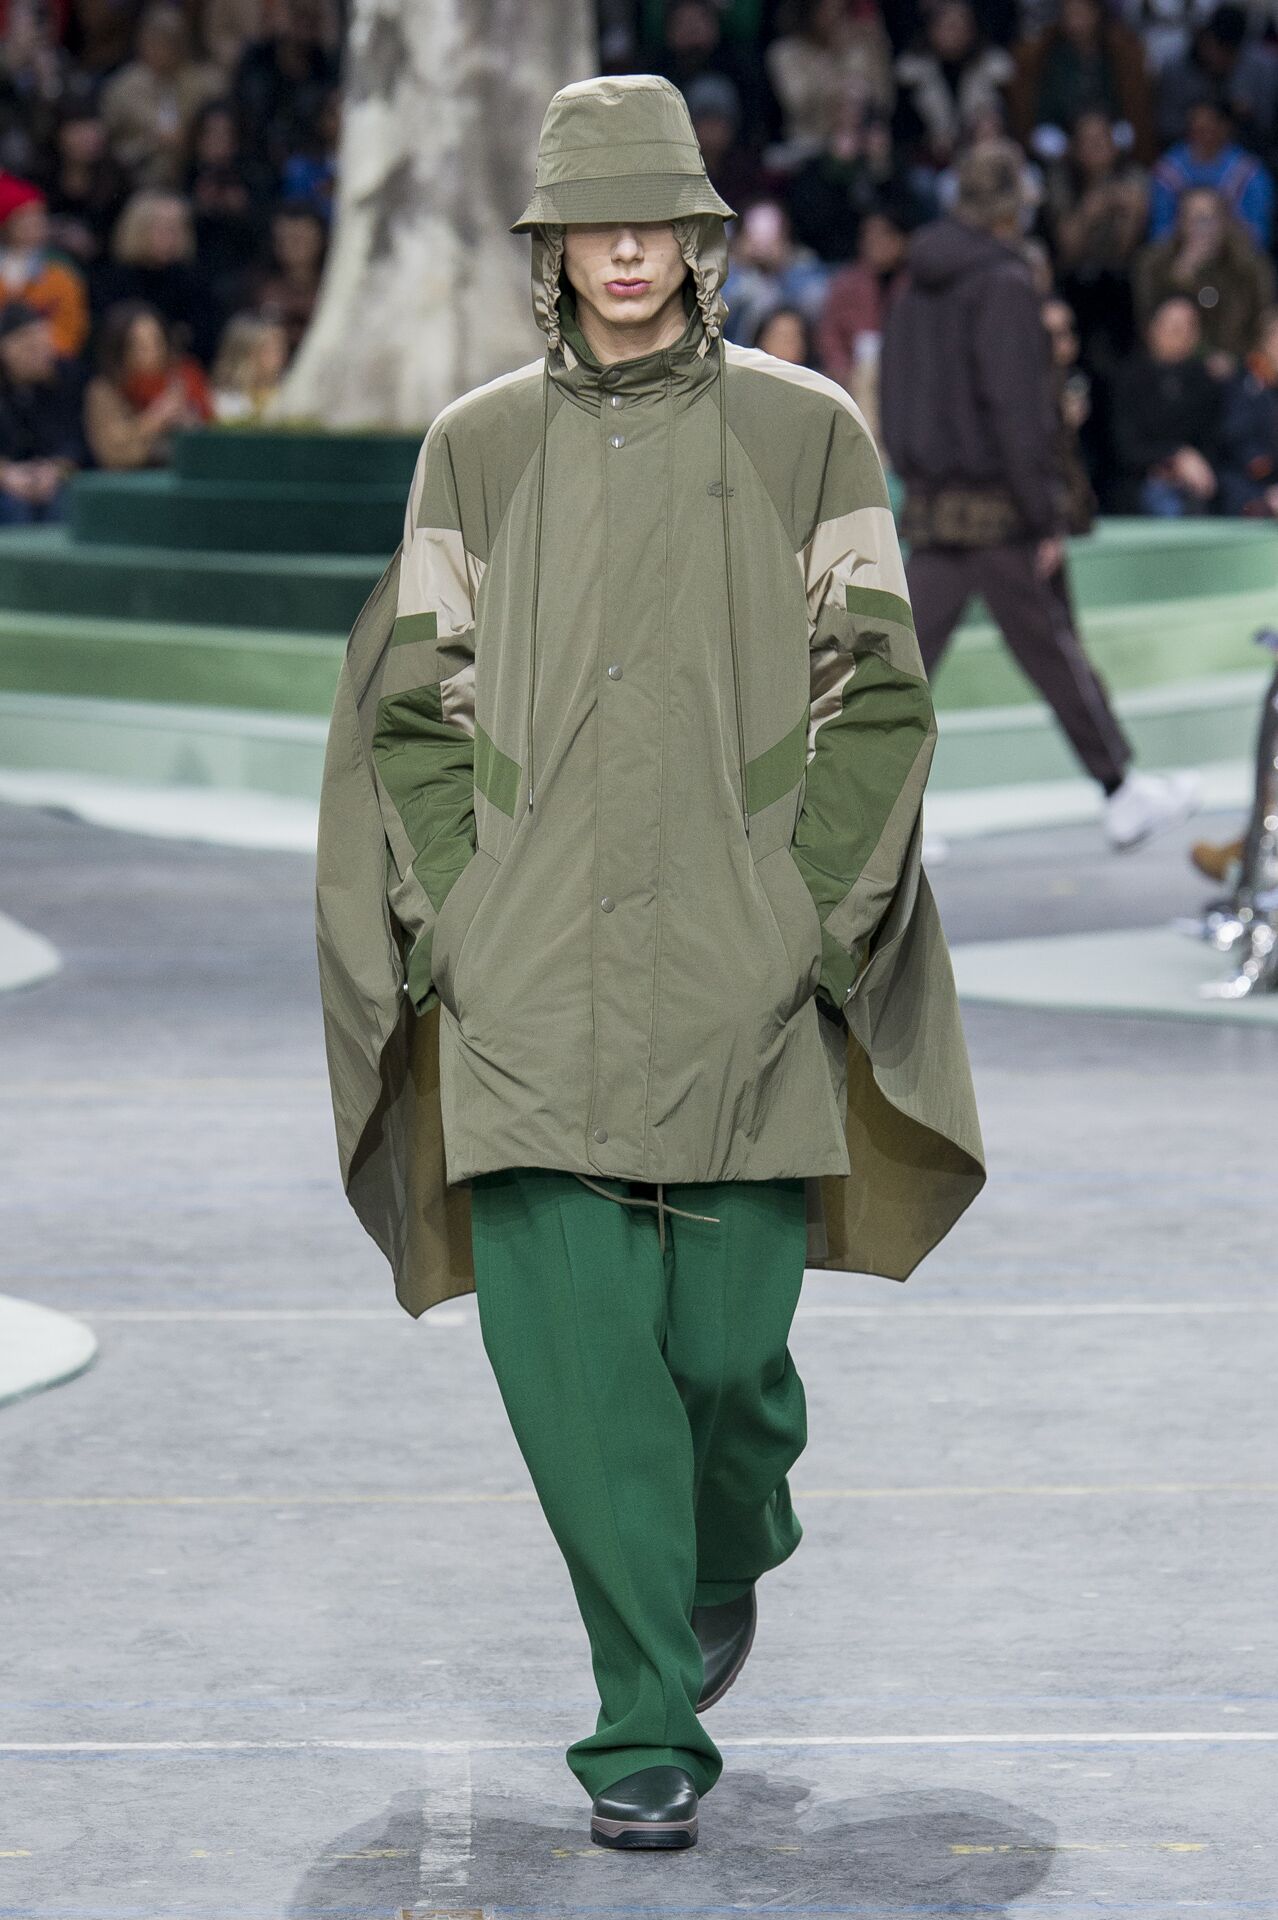 LACOSTE FALL WINTER 2018 COLLECTION | The Skinny Beep